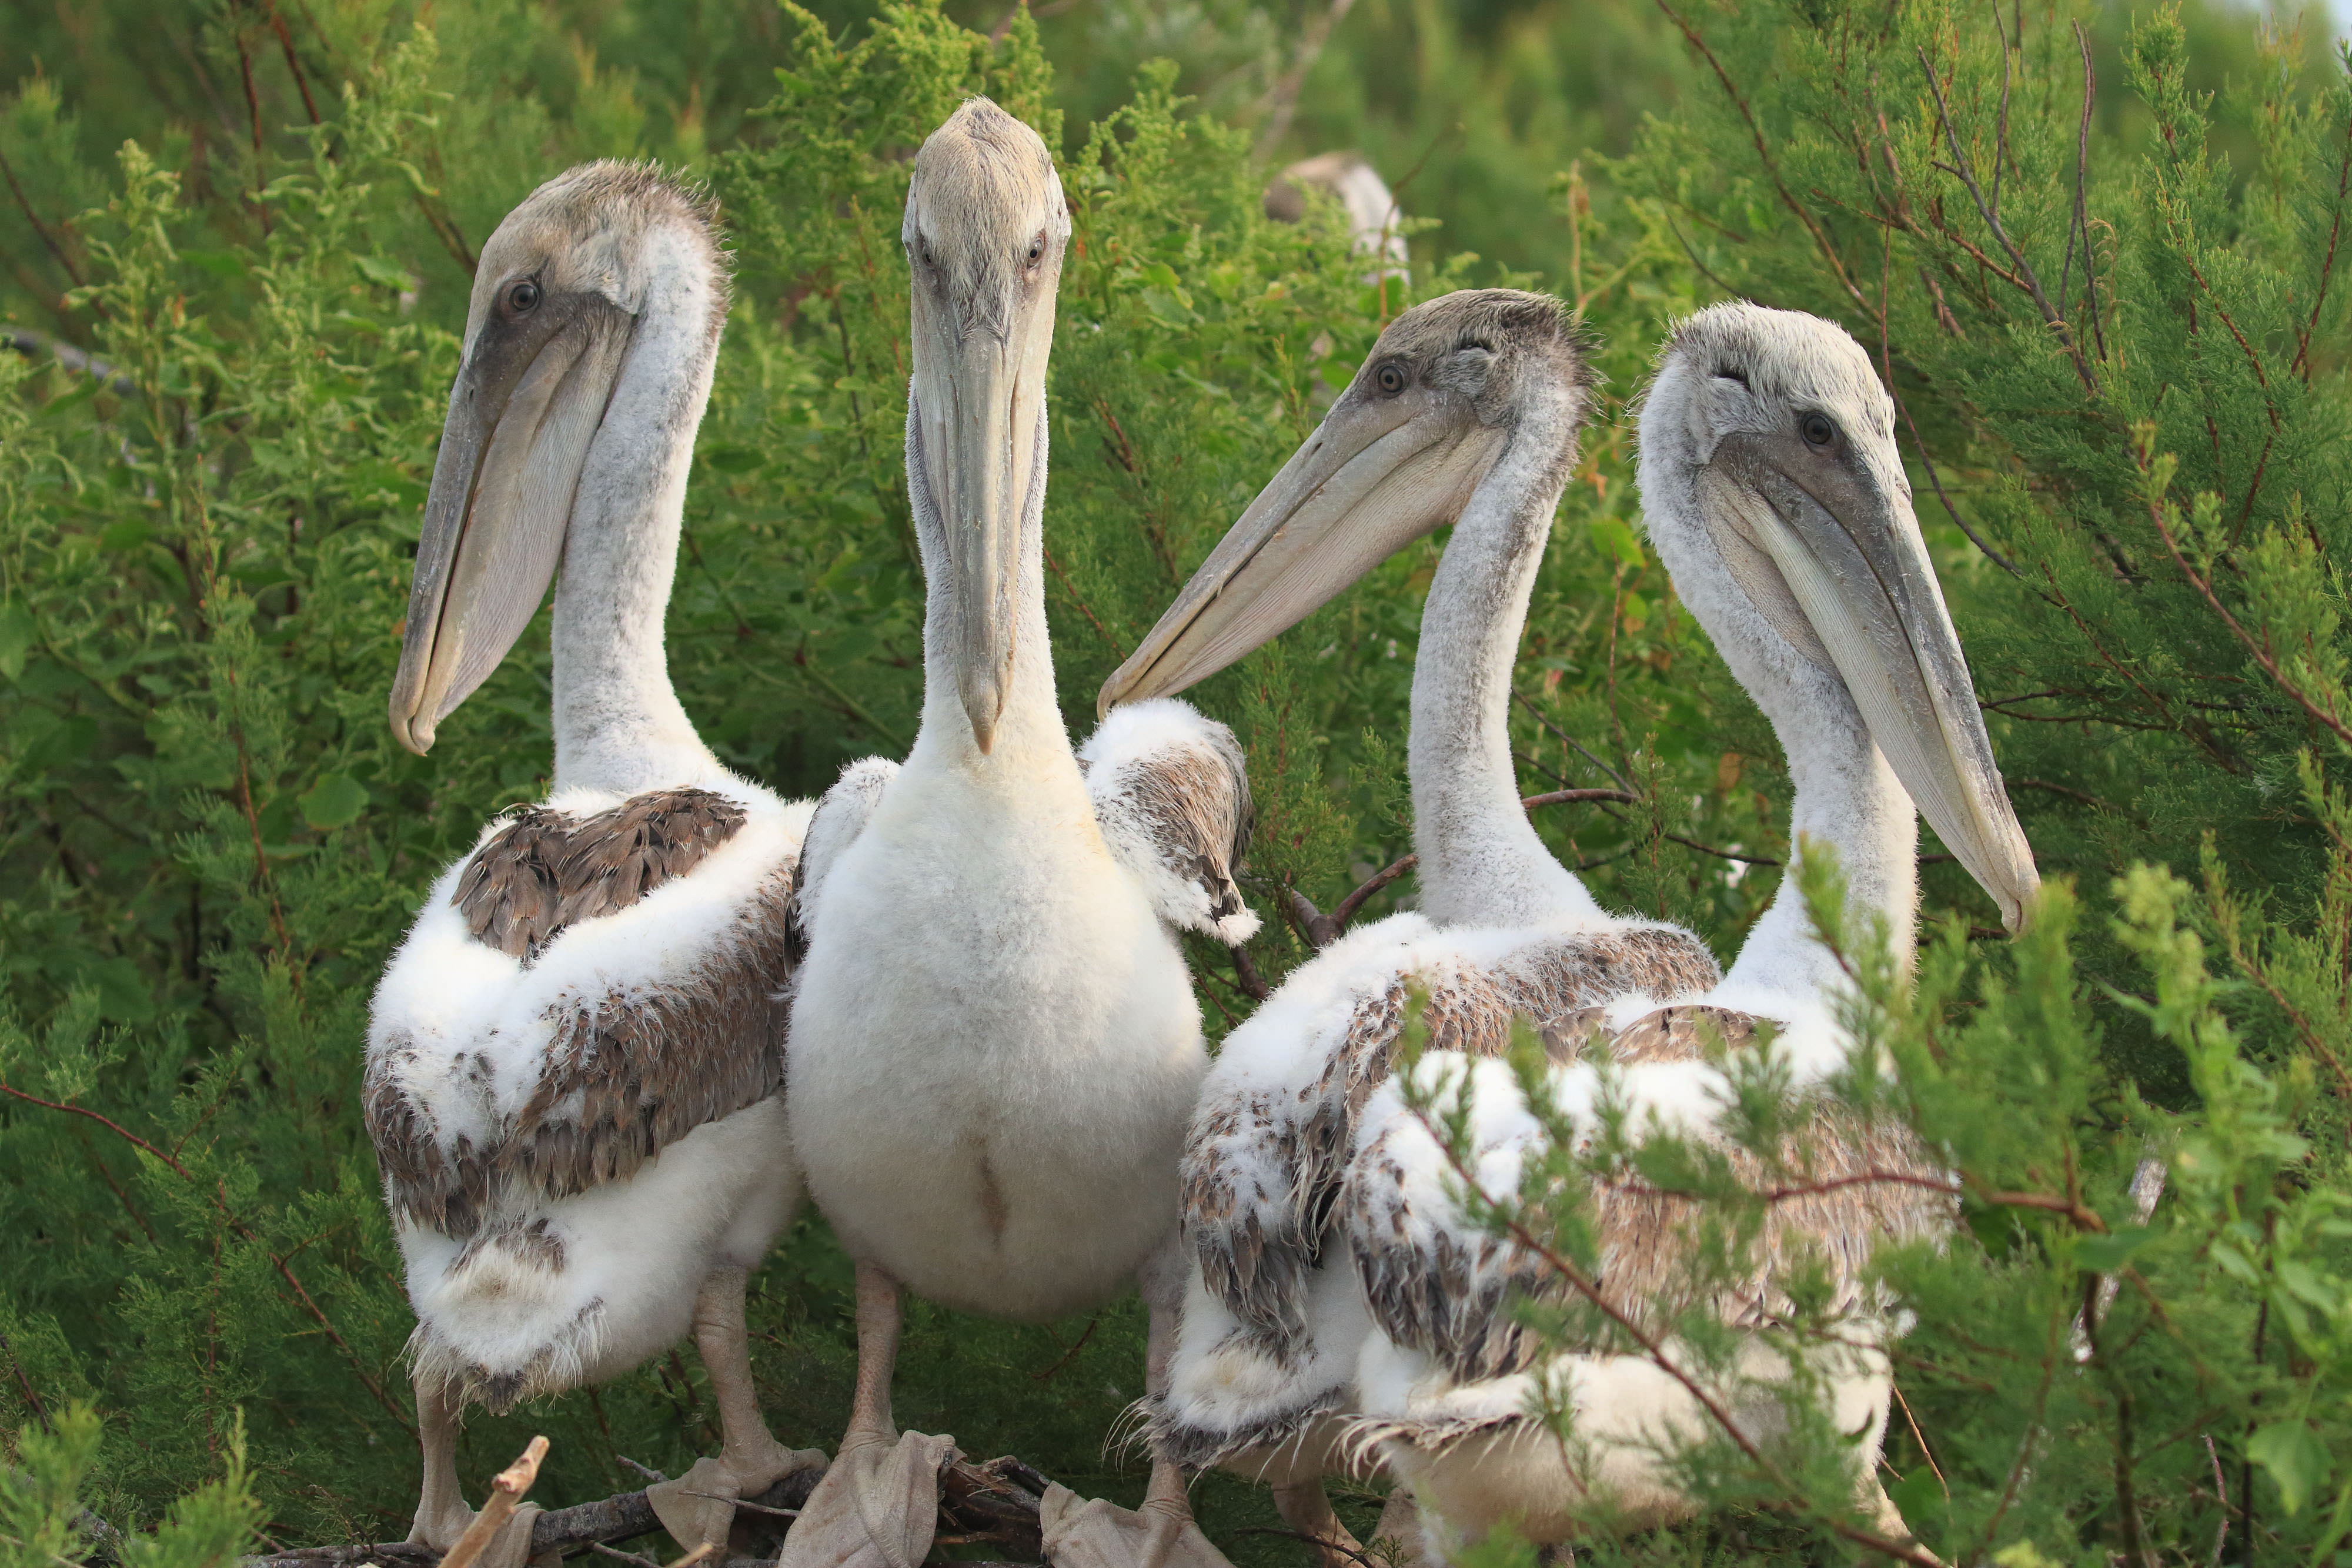 Four large pelicans sit on a branch amongst dense green shrubs.